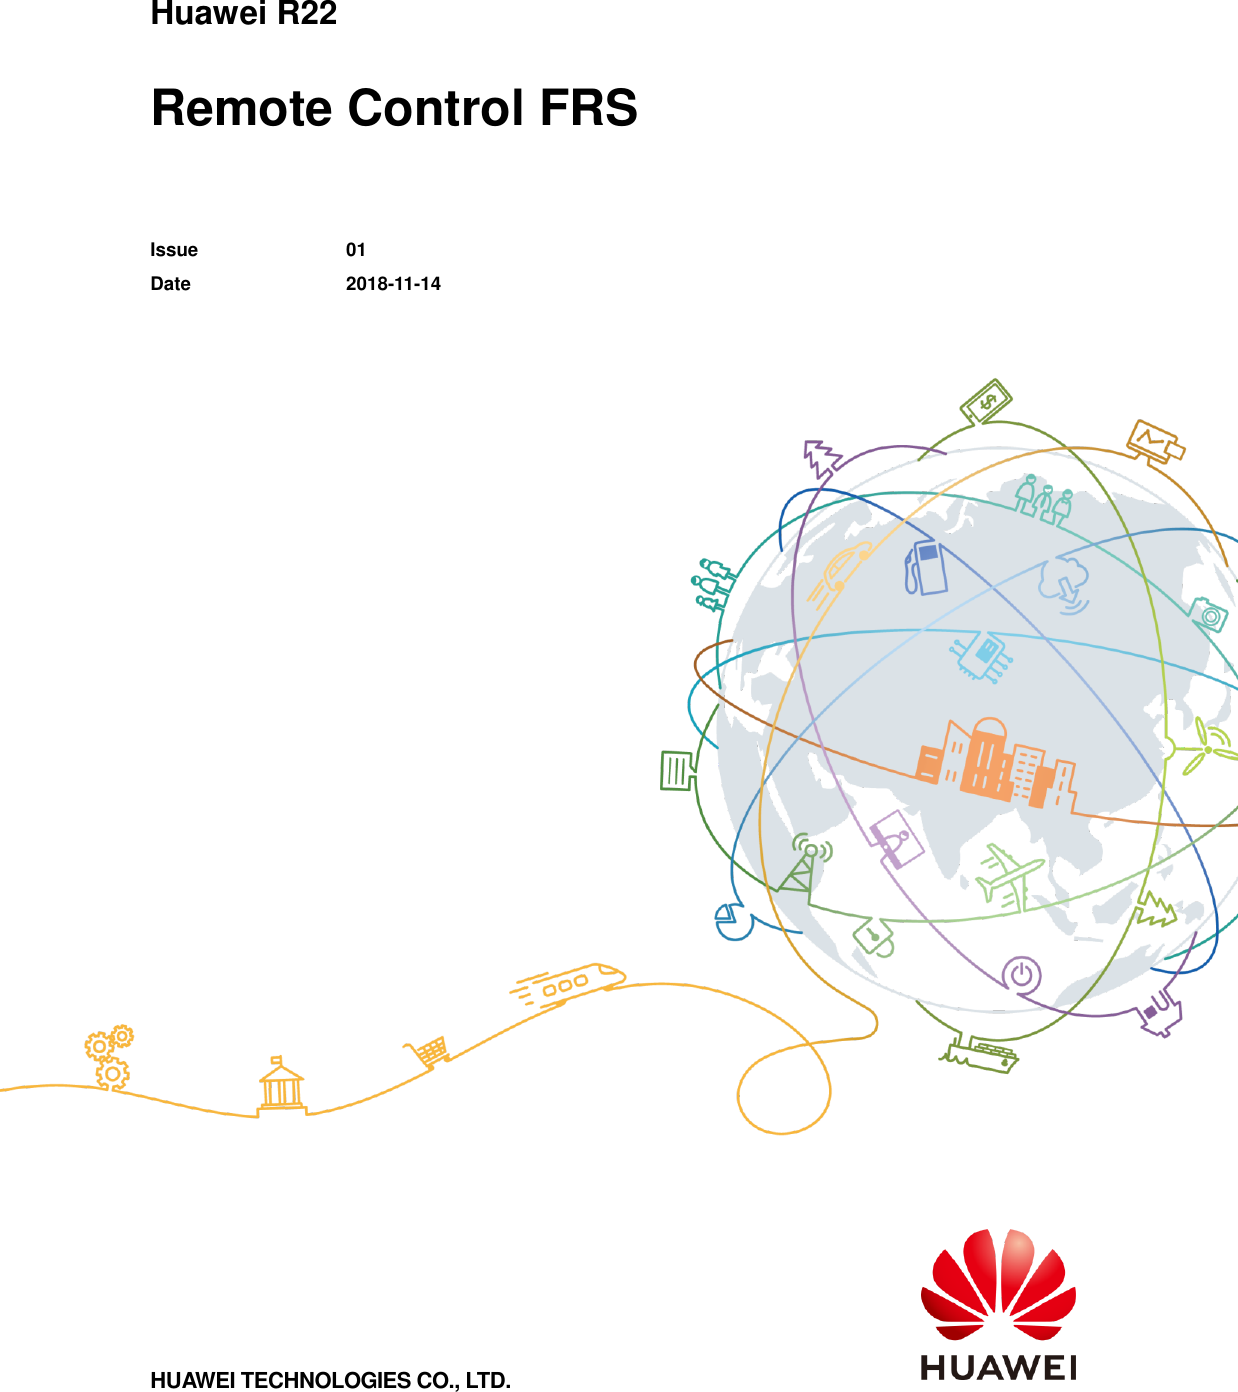      Huawei R22  Remote Control FRS Issue 01 Date 2018-11-14   HUAWEI TECHNOLOGIES CO., LTD.   